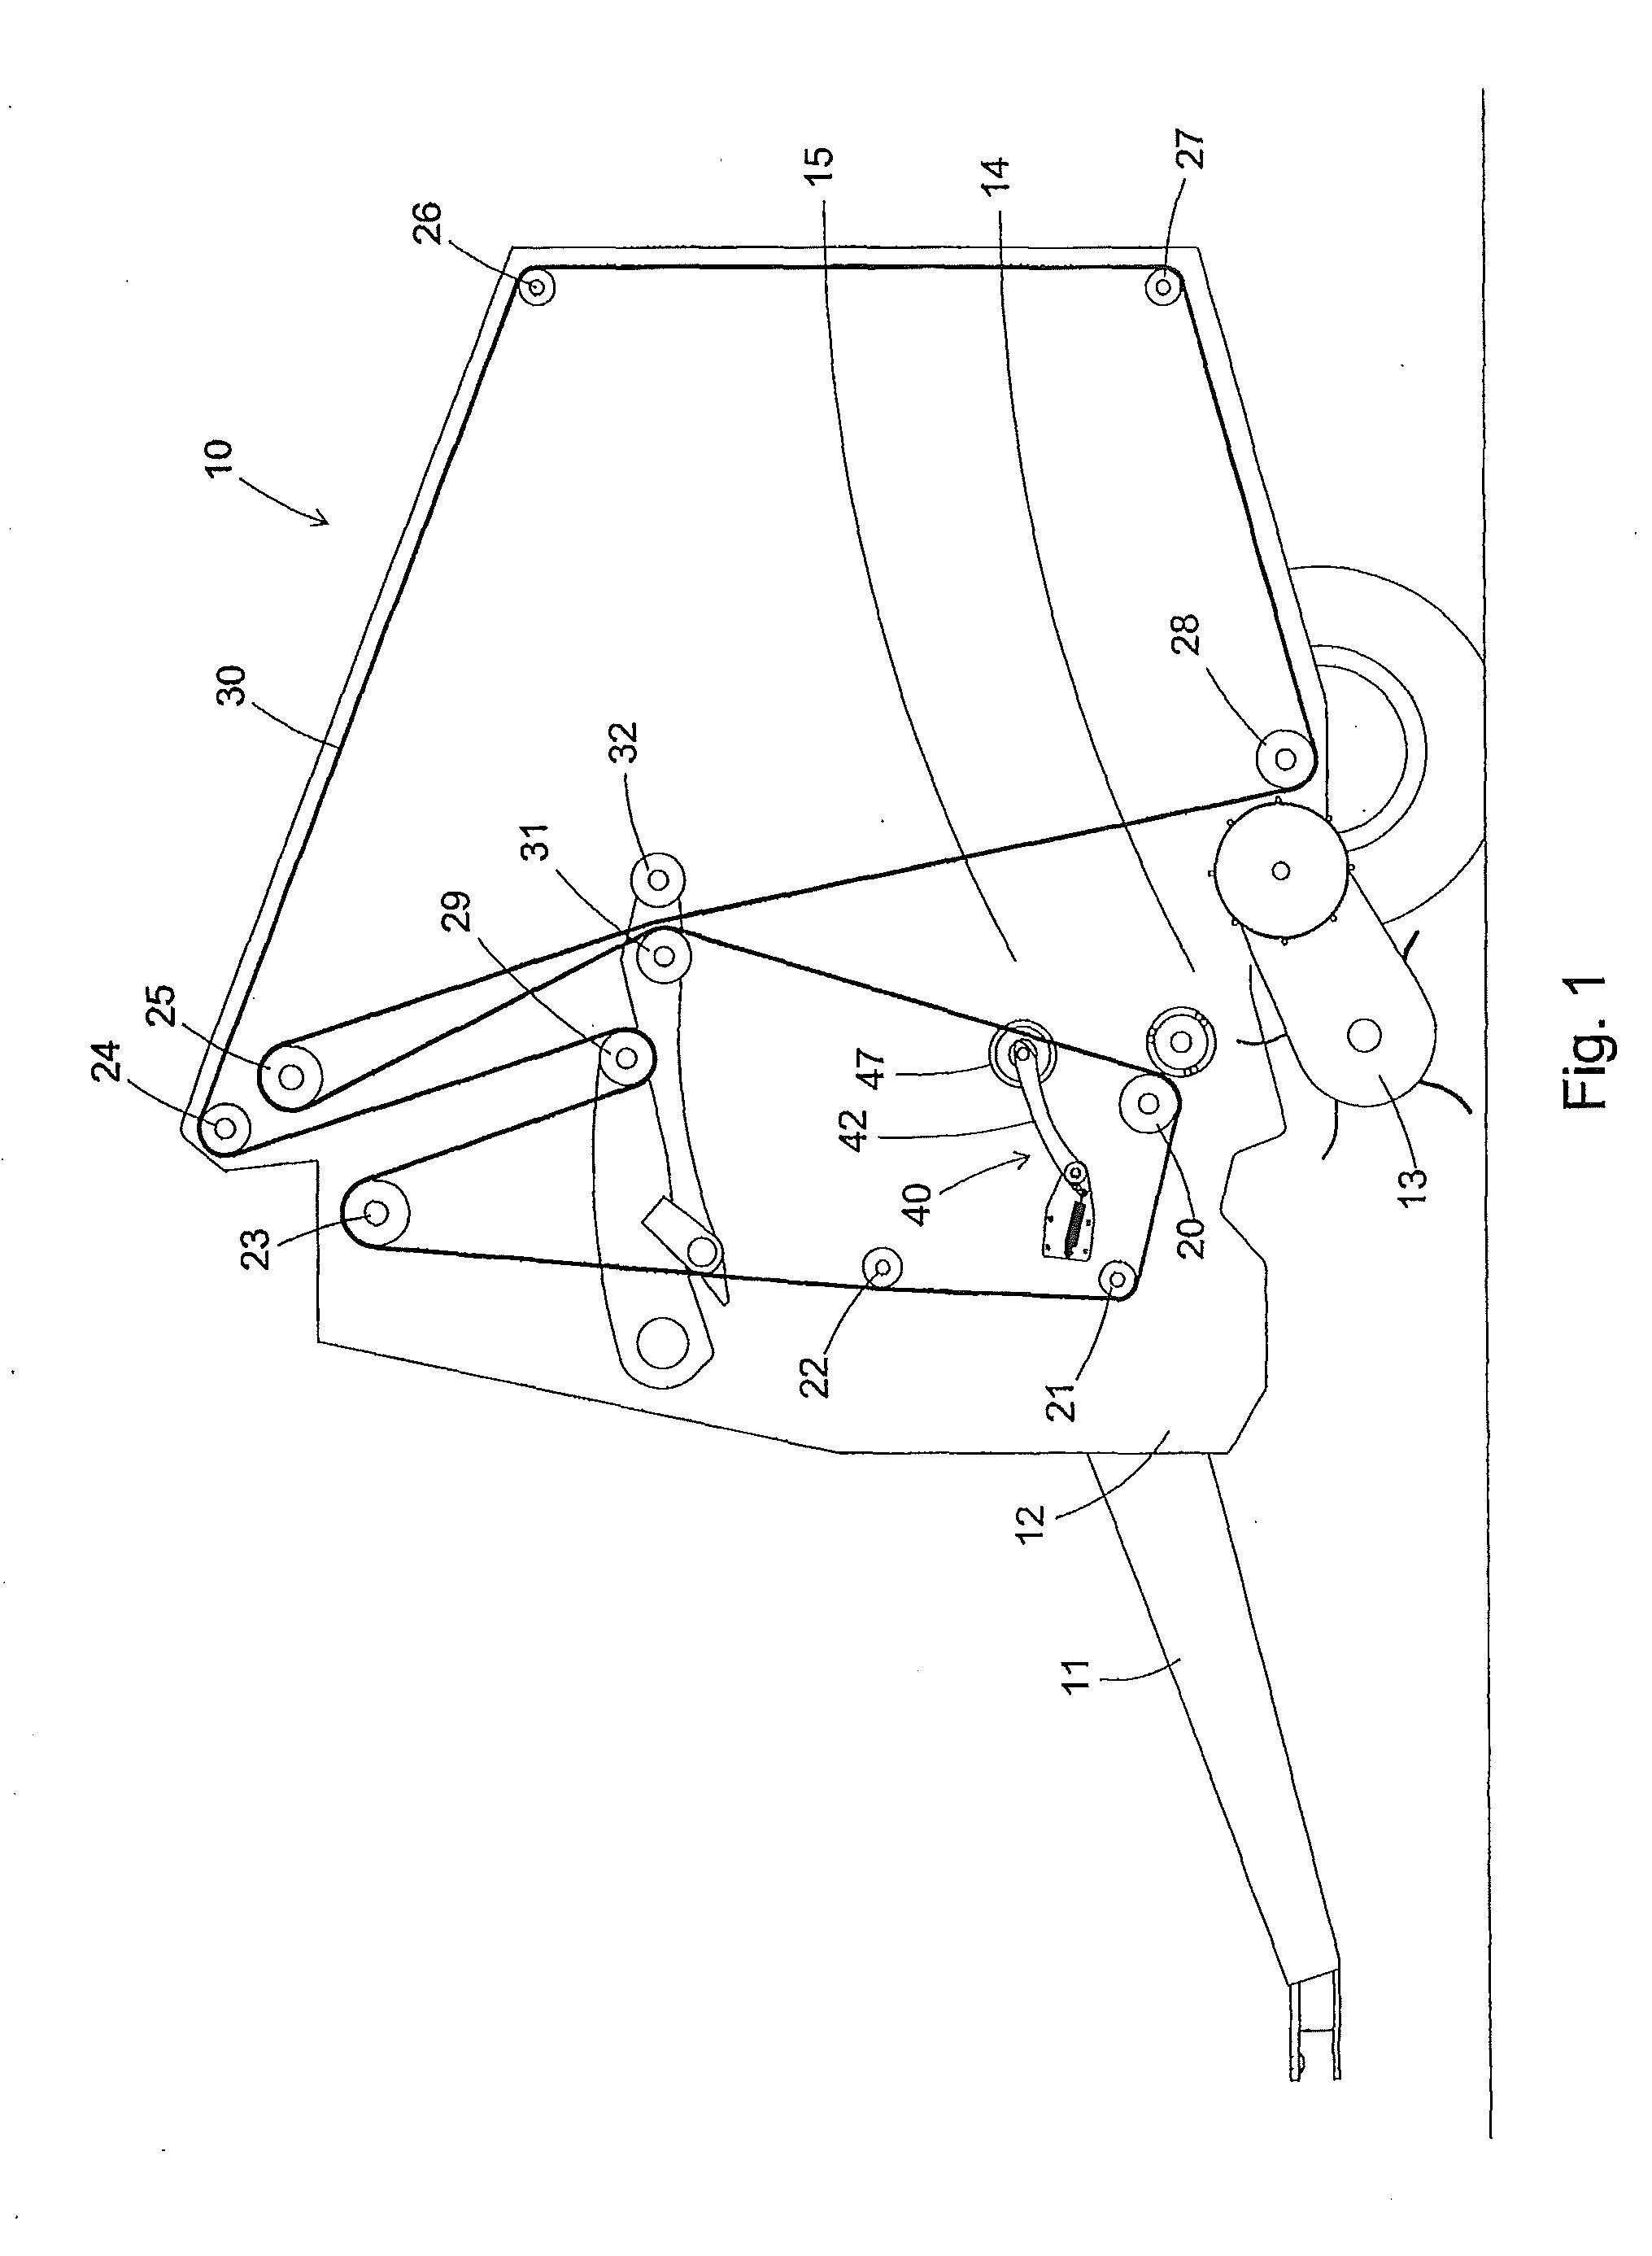 Rotary hay wedge for round balers